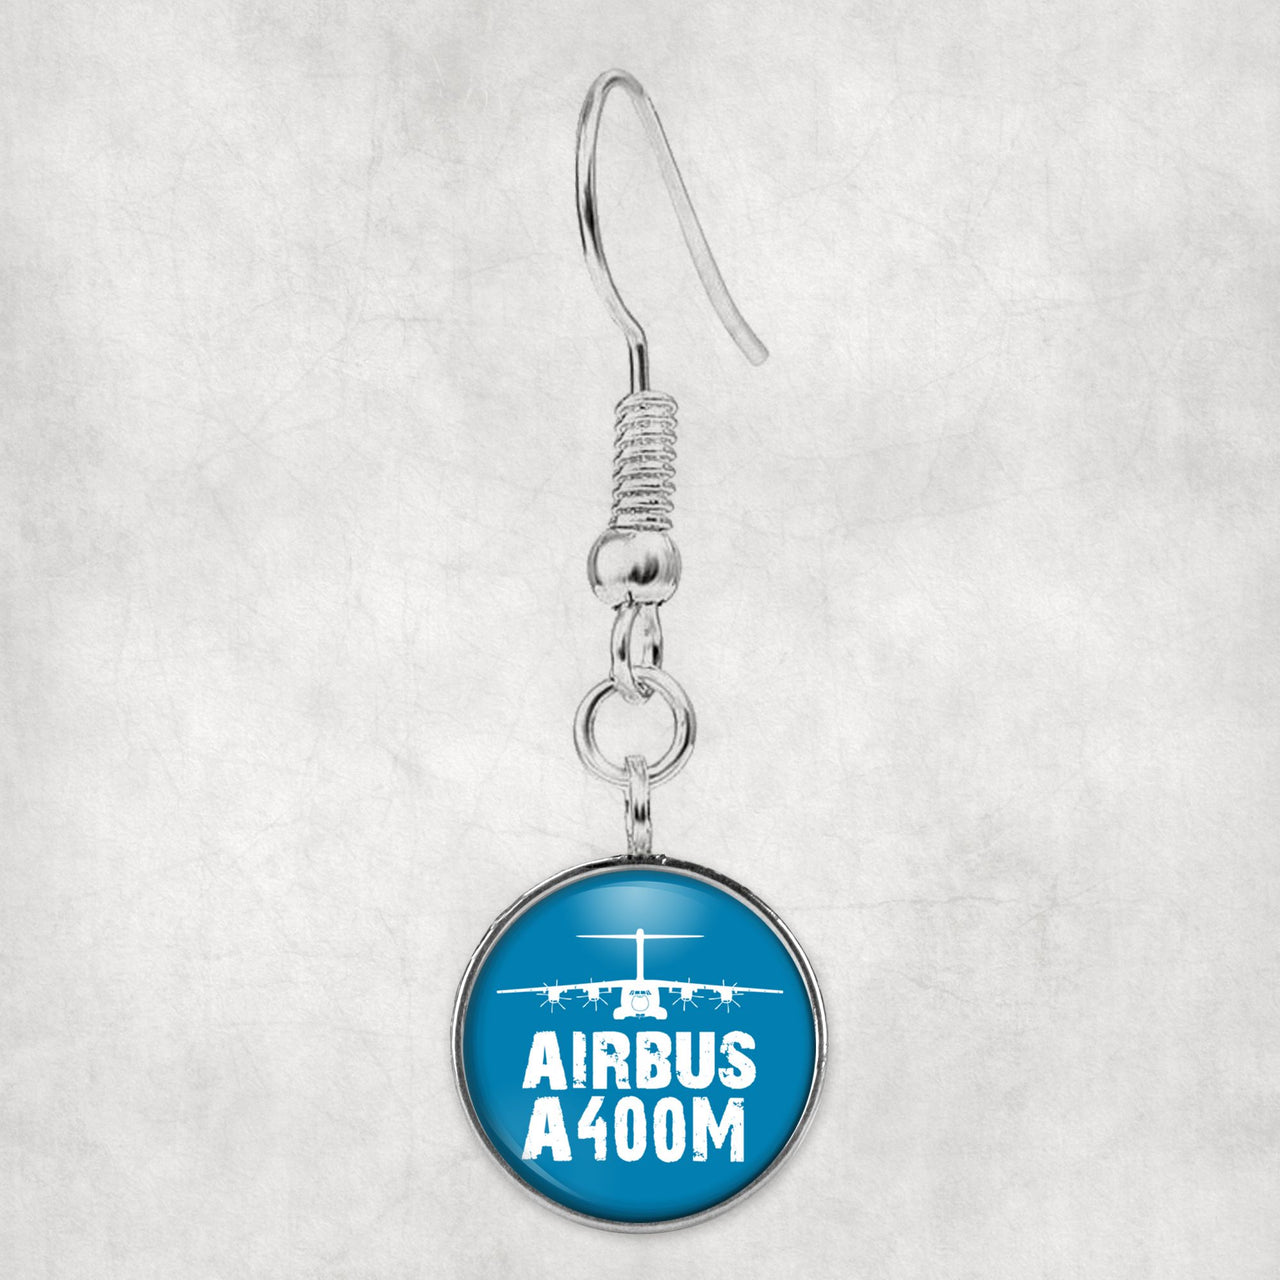 Airbus A400M & Plane Designed Earrings